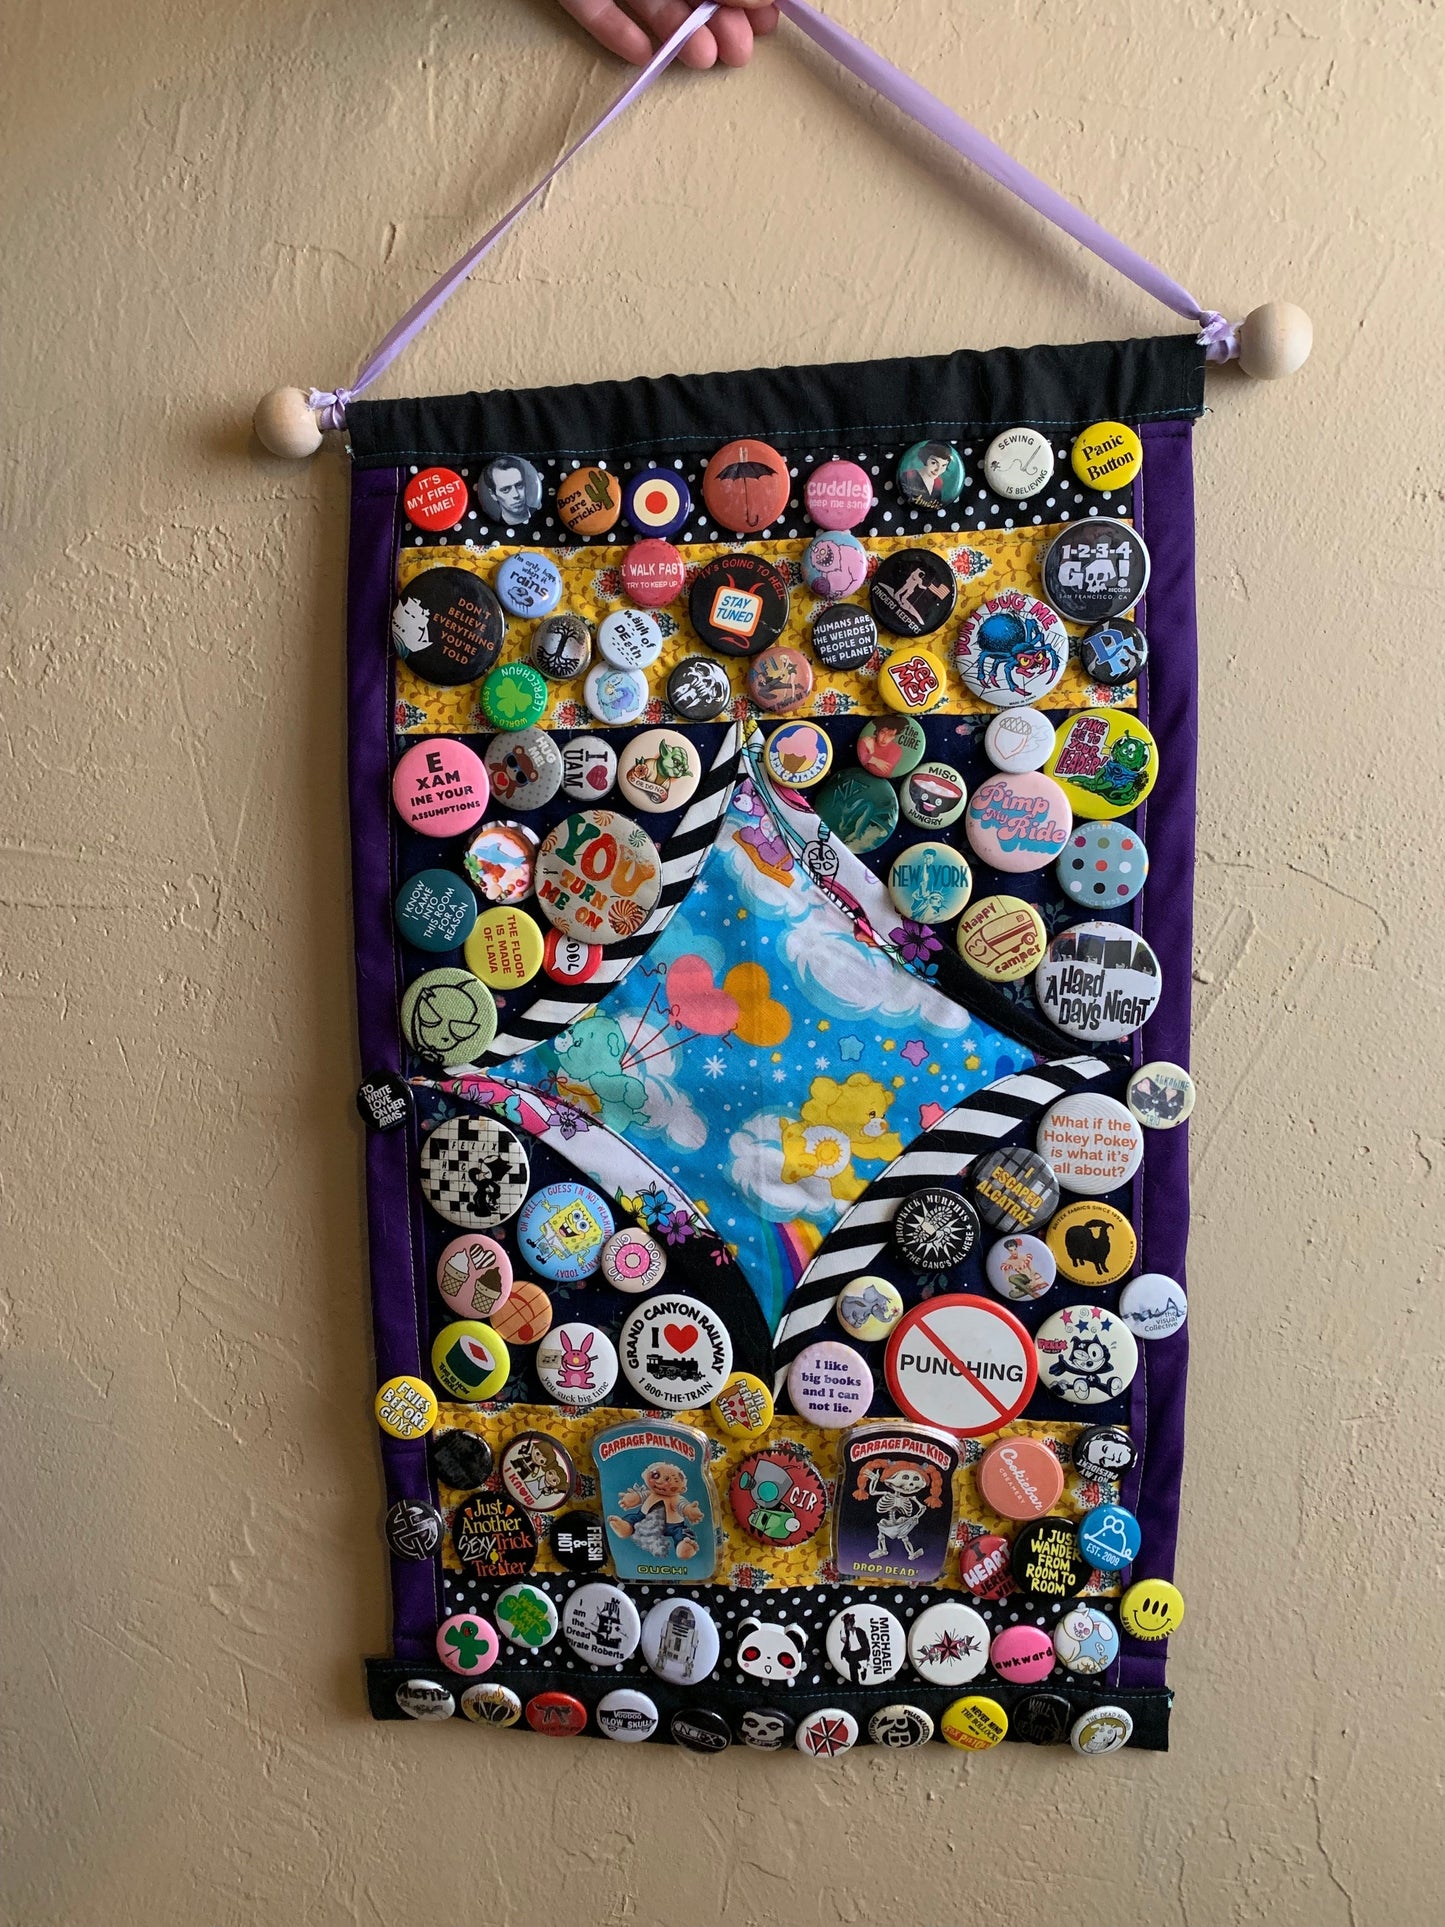 a pin display held against a wall, with various pinback buttons, to show ideas for collection display.